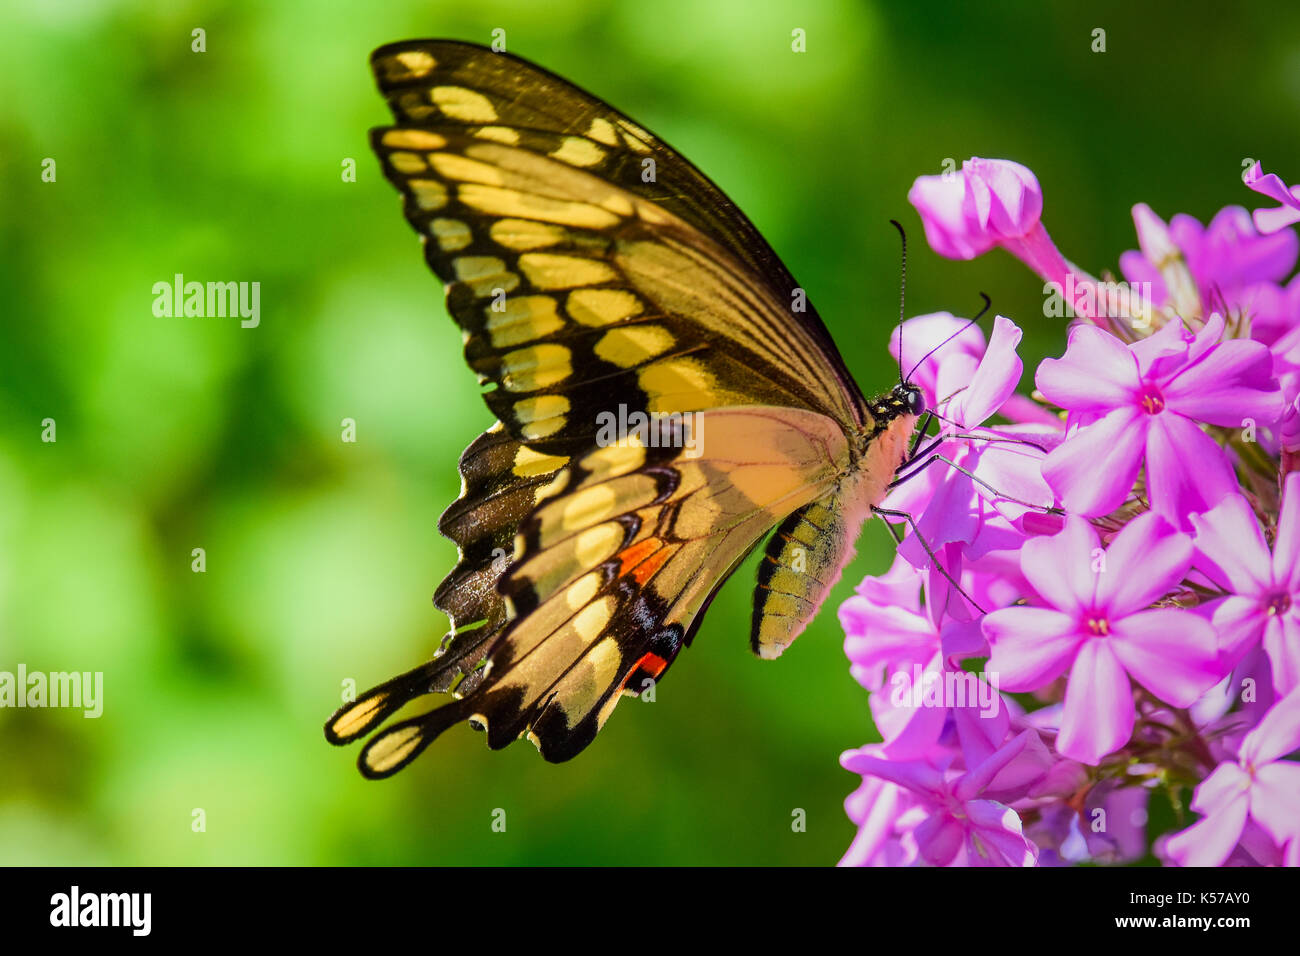 Giant swallowtail butterfly (Papilio cresphontes) feeding on pink or purple phlox flowers in the garden in Speculator, New York NY USA. Stock Photo